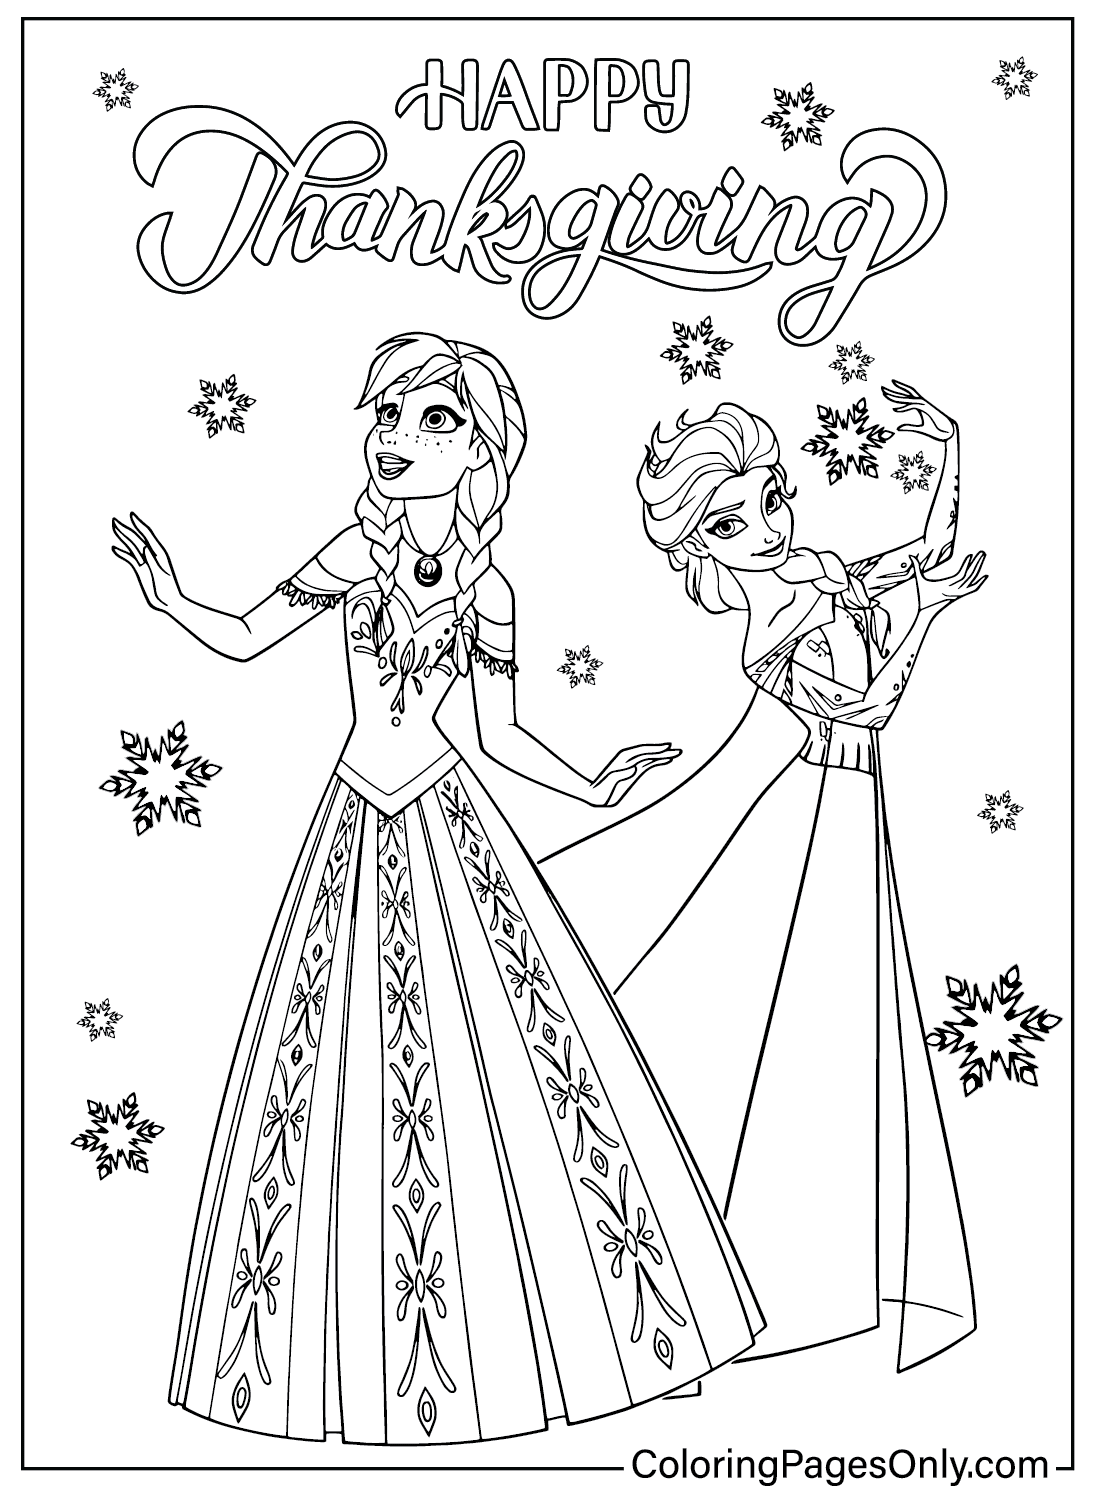 Coloring Page Disney Thanksgiving from Disney Thanksgiving